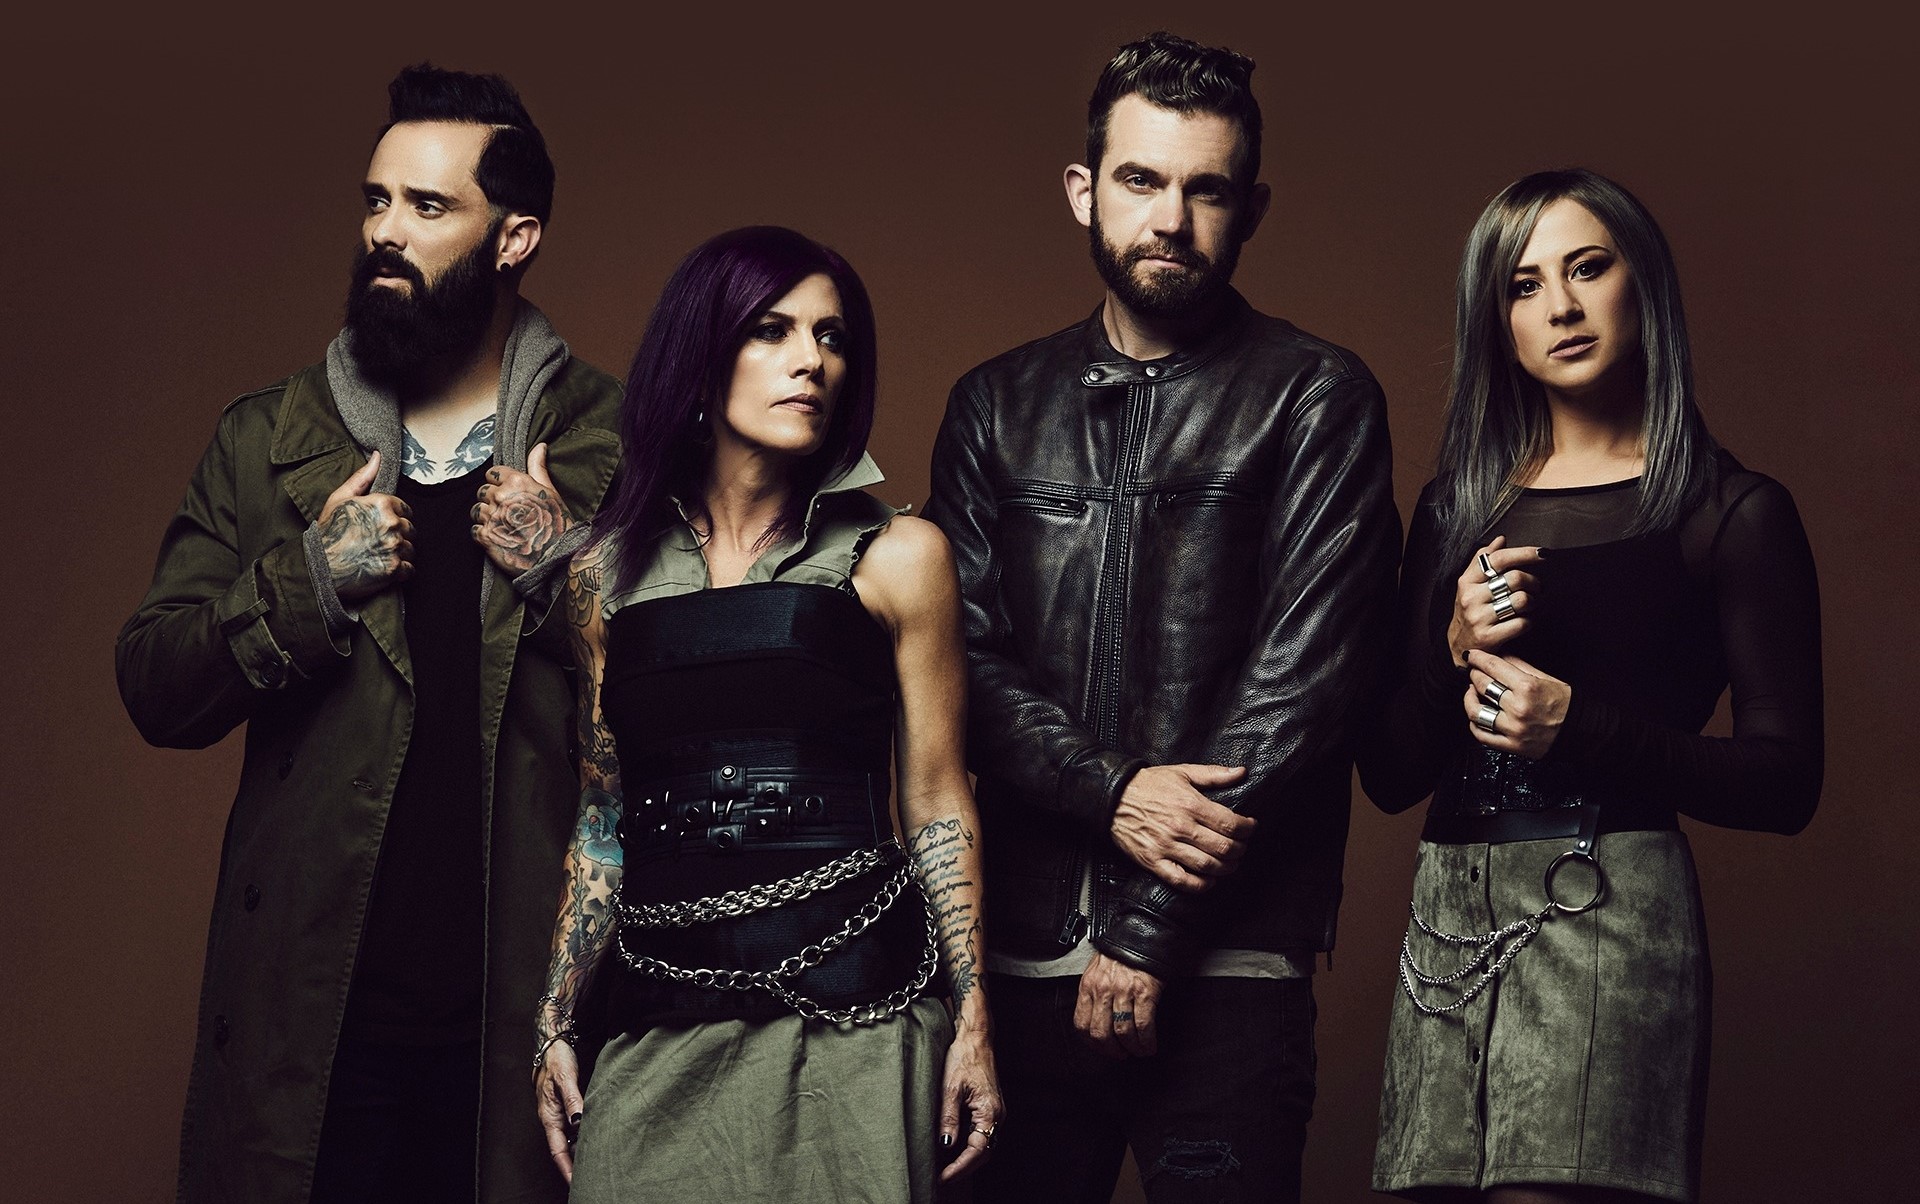 skillet tour with